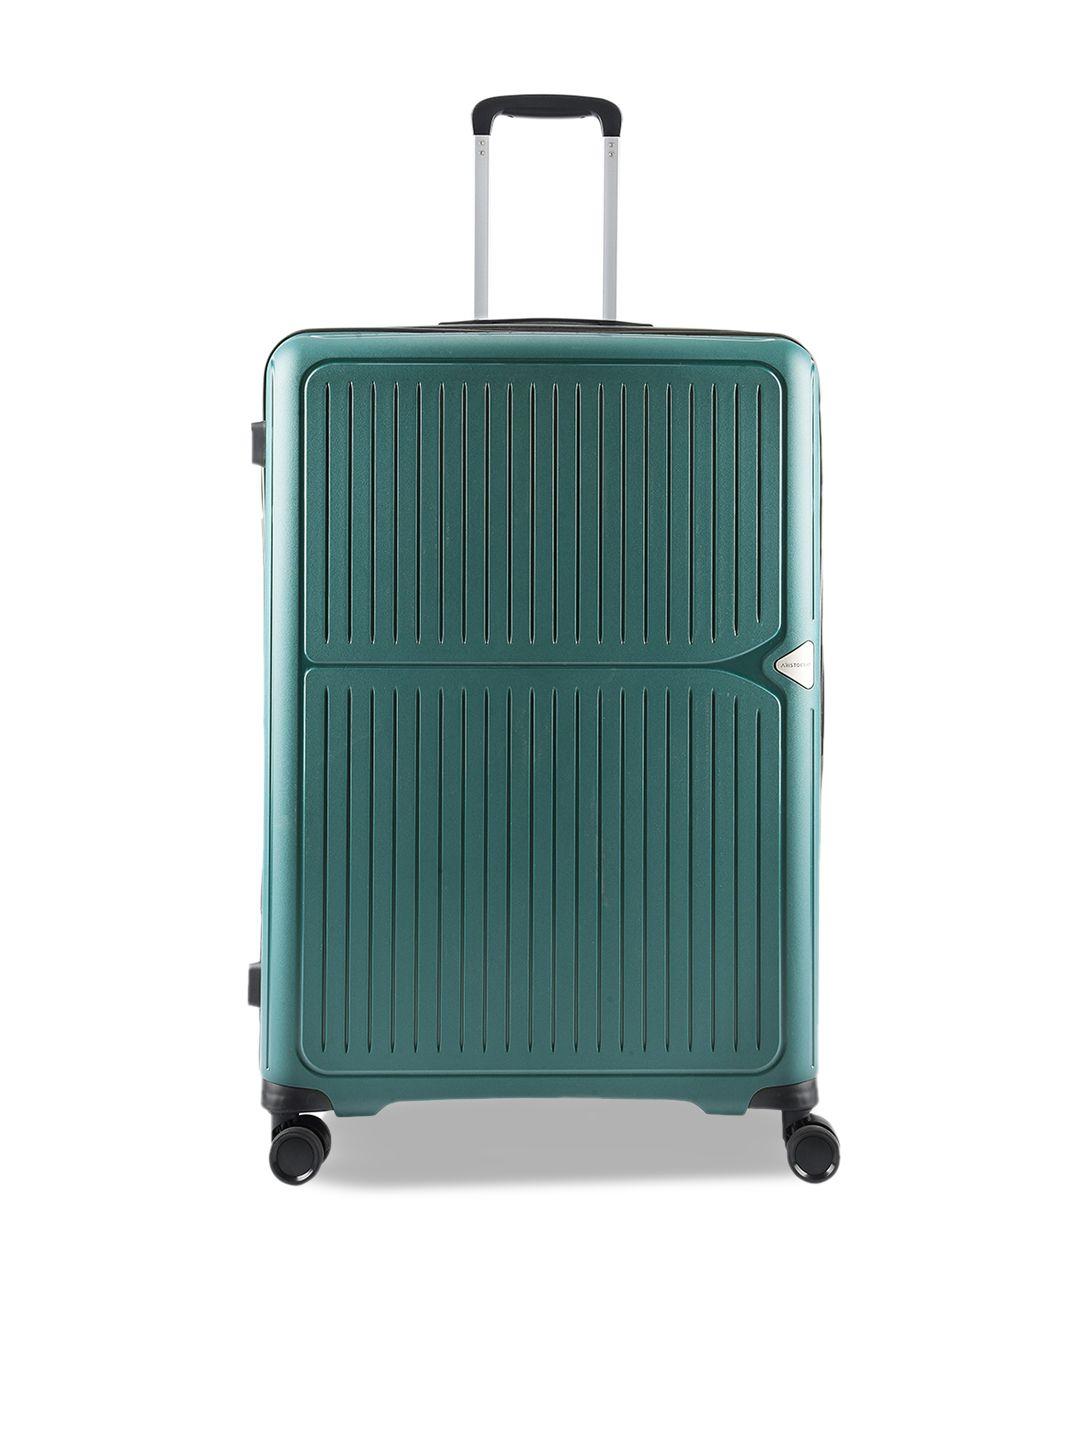 aristocrat hard-sided trolley suitcases